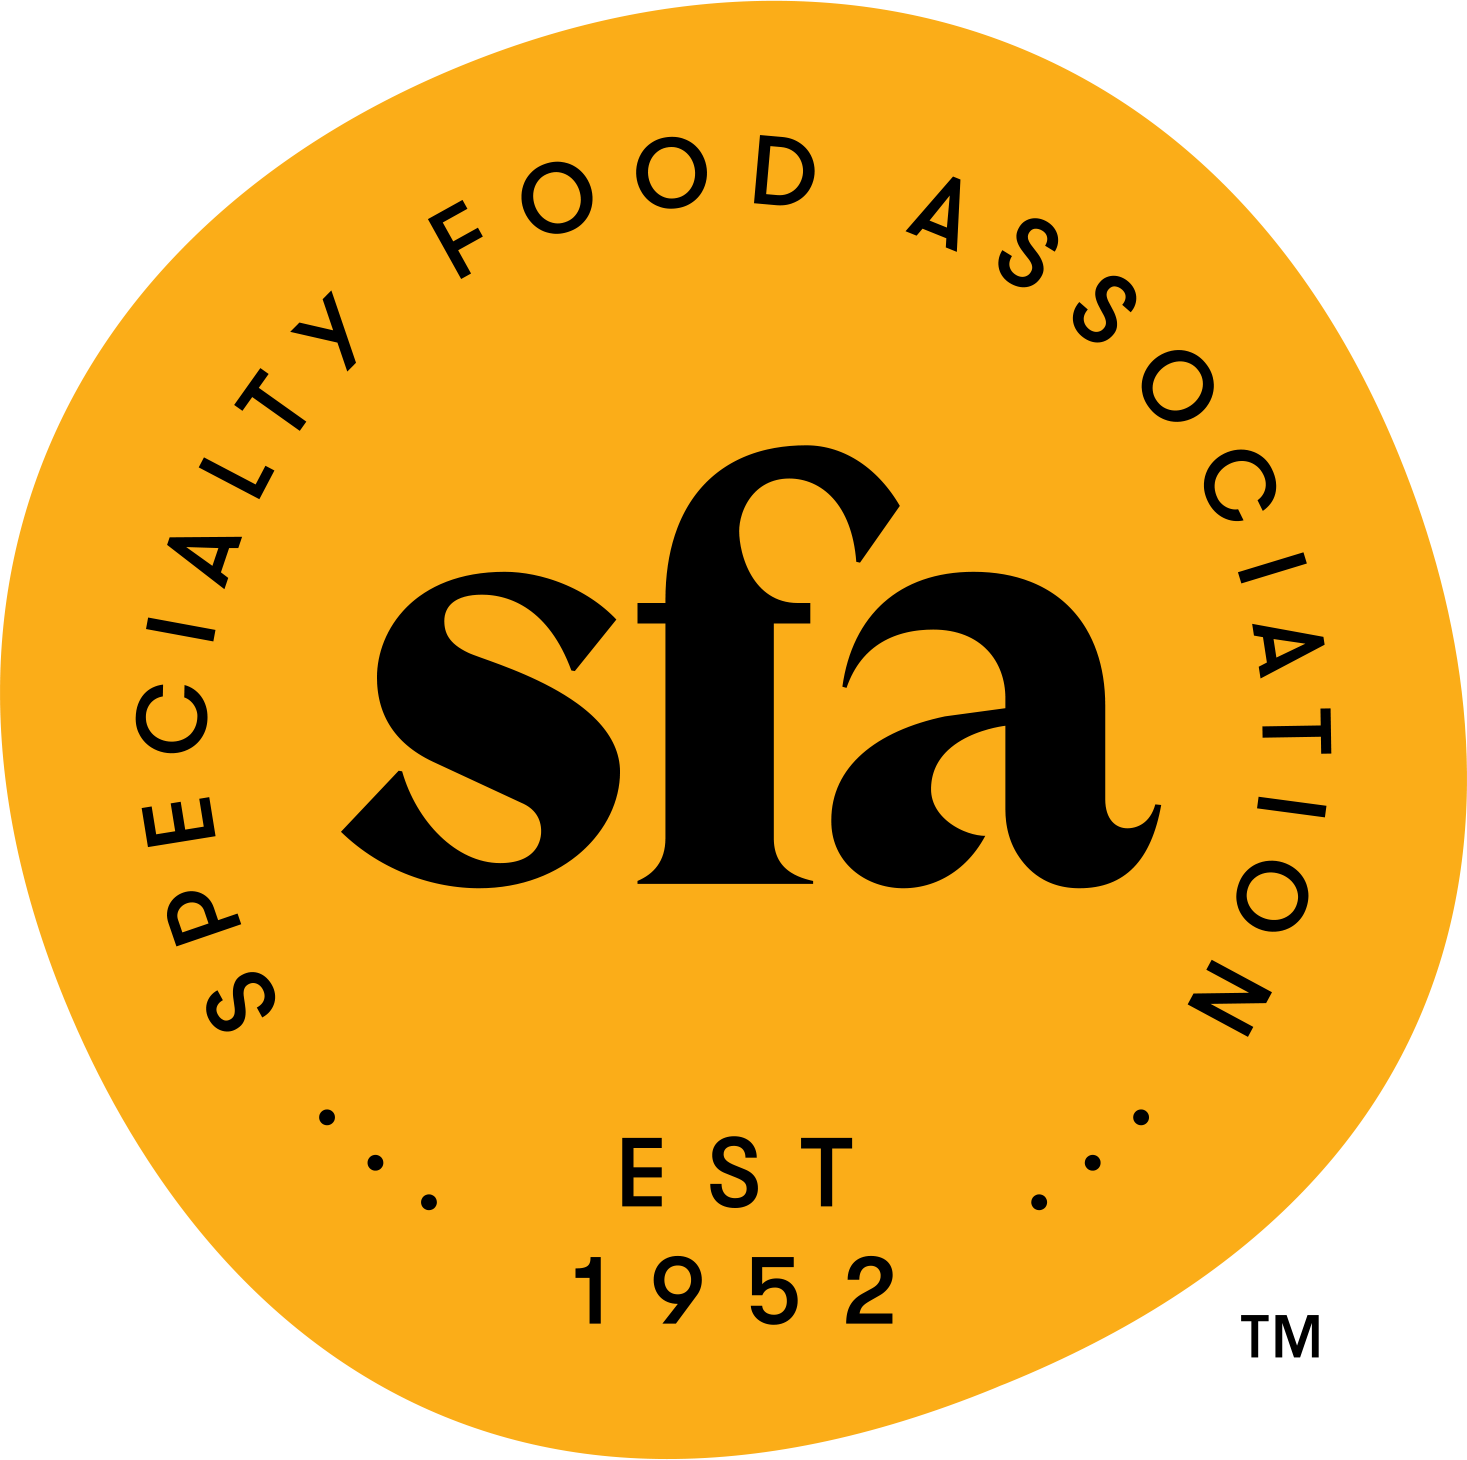 Amotrio becomes a tier 2 member of the specialty food association